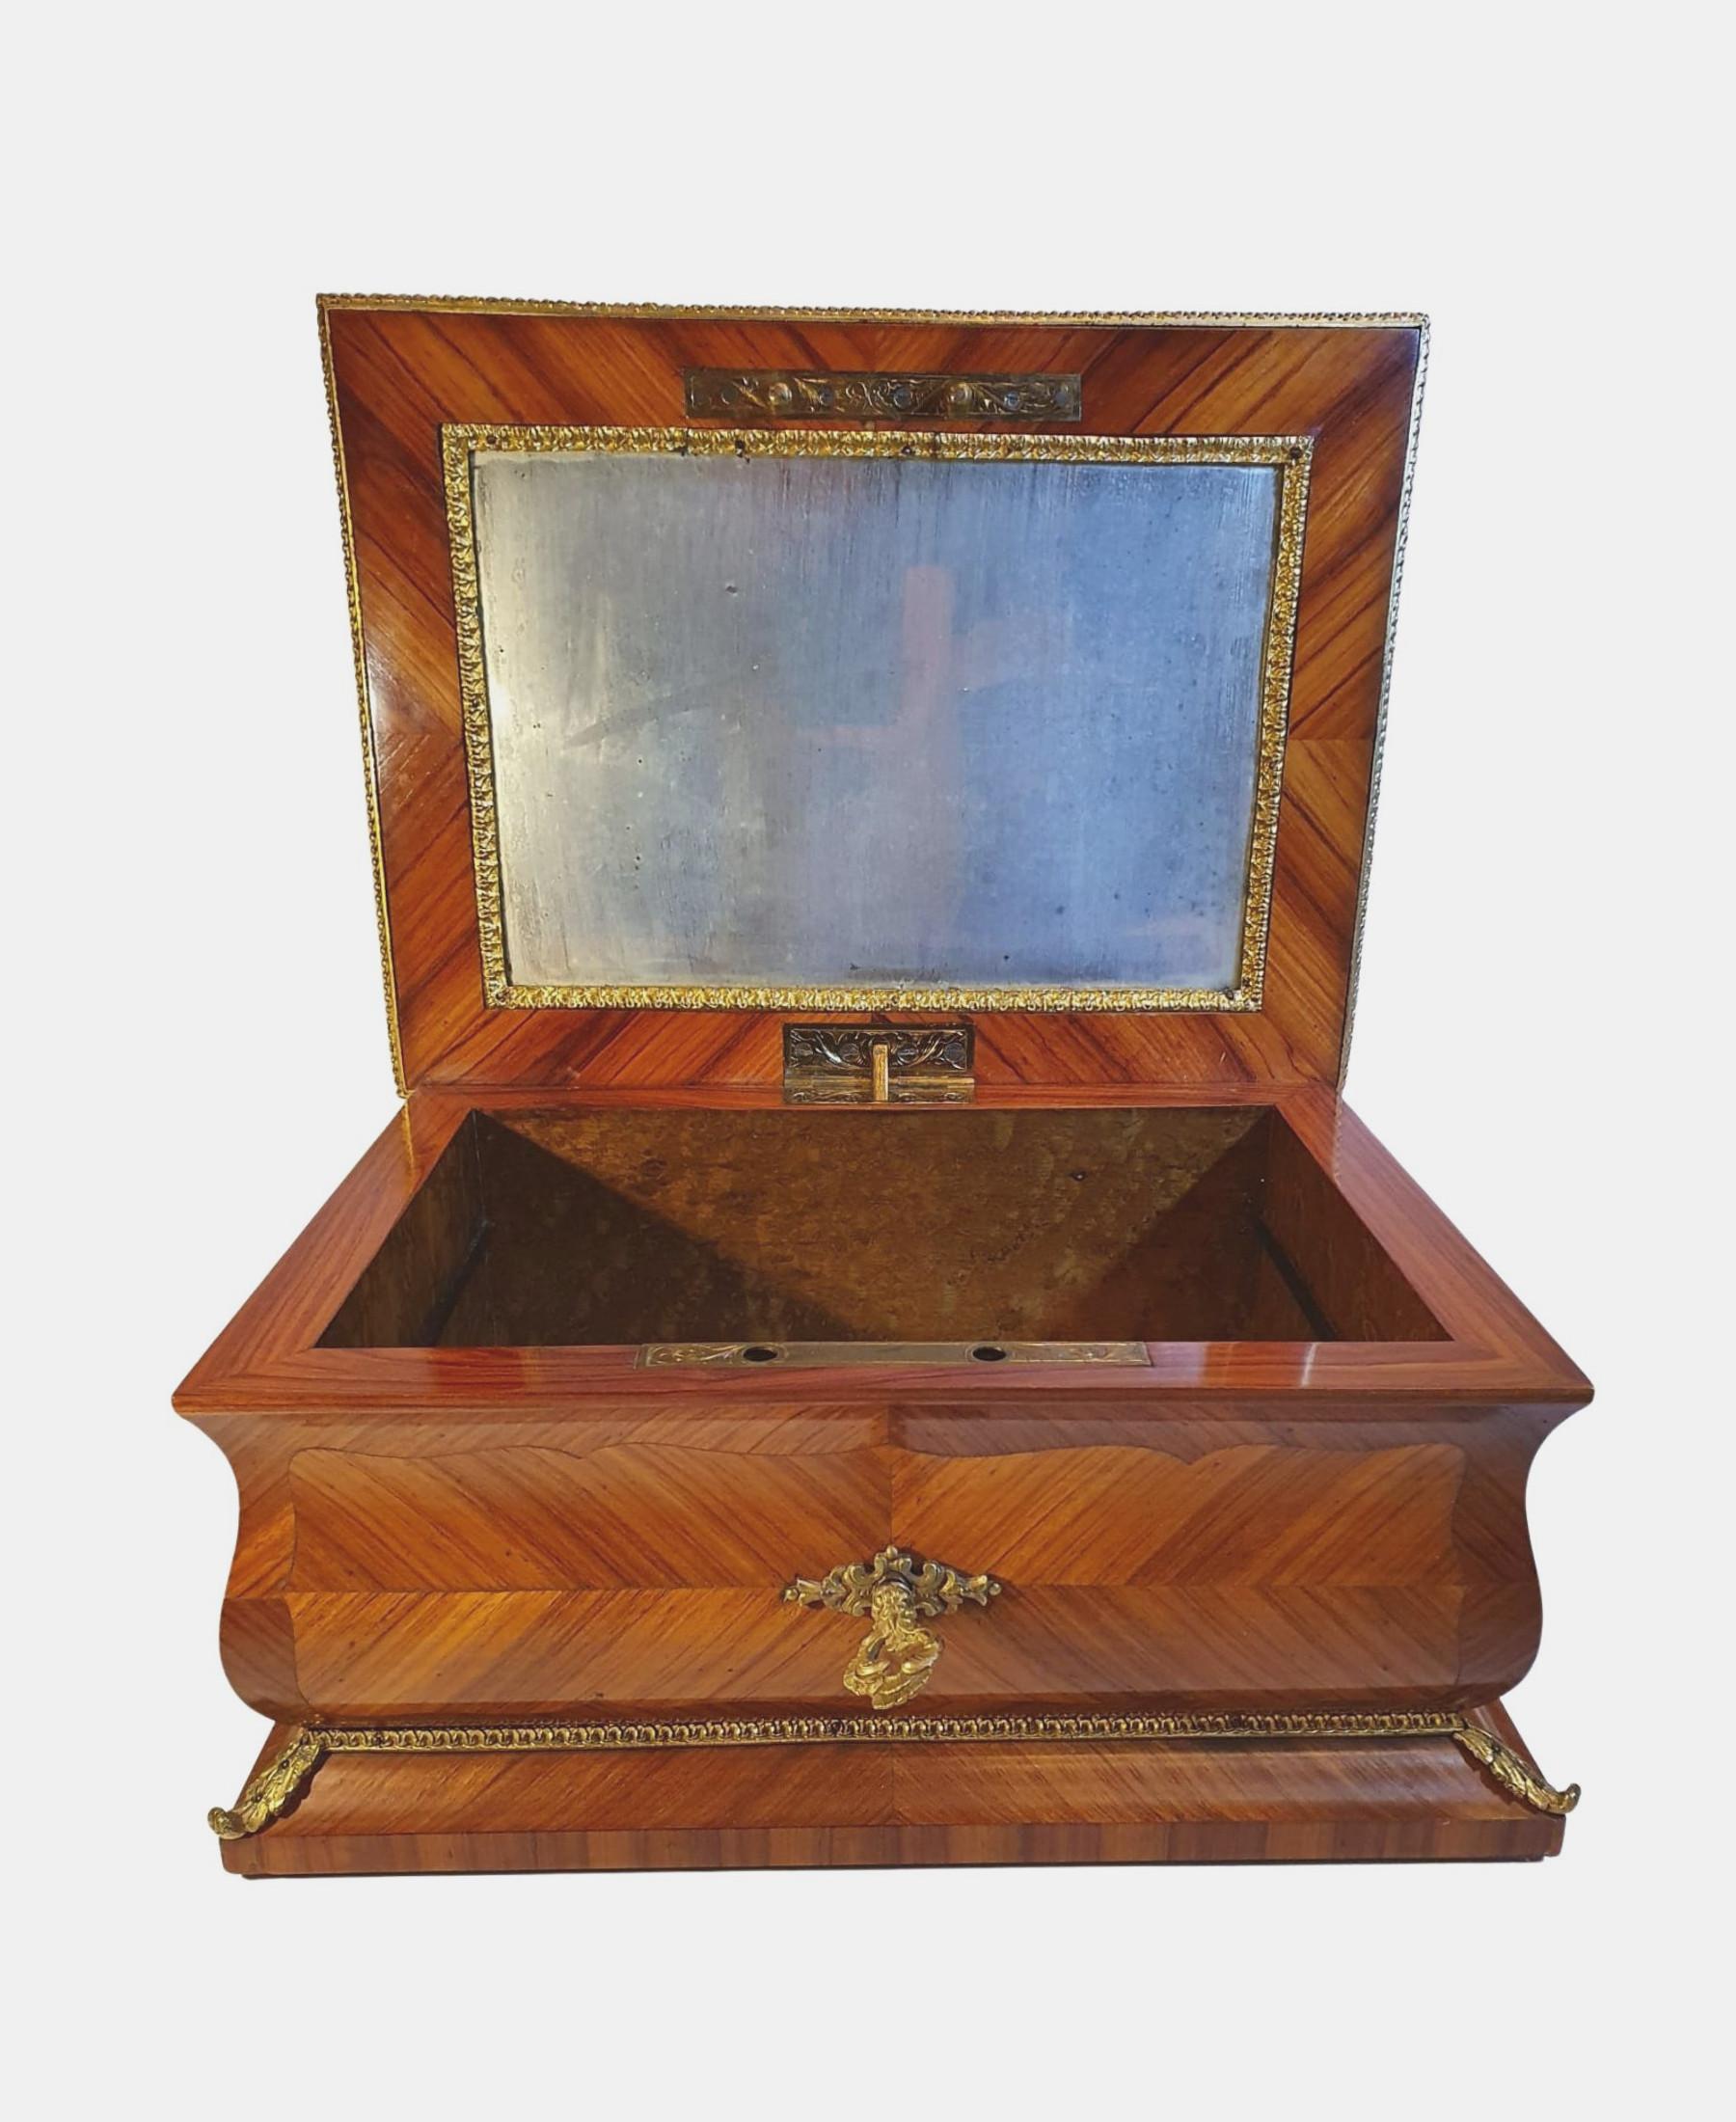 A stunning 19th century kingwood jewellery box with gorgeous ormolu dec-oration throughout, the moulded top of rectangular form beautifully quar-tered veneered and cross banded with central cartouche, opening to reveal fitted section with inset